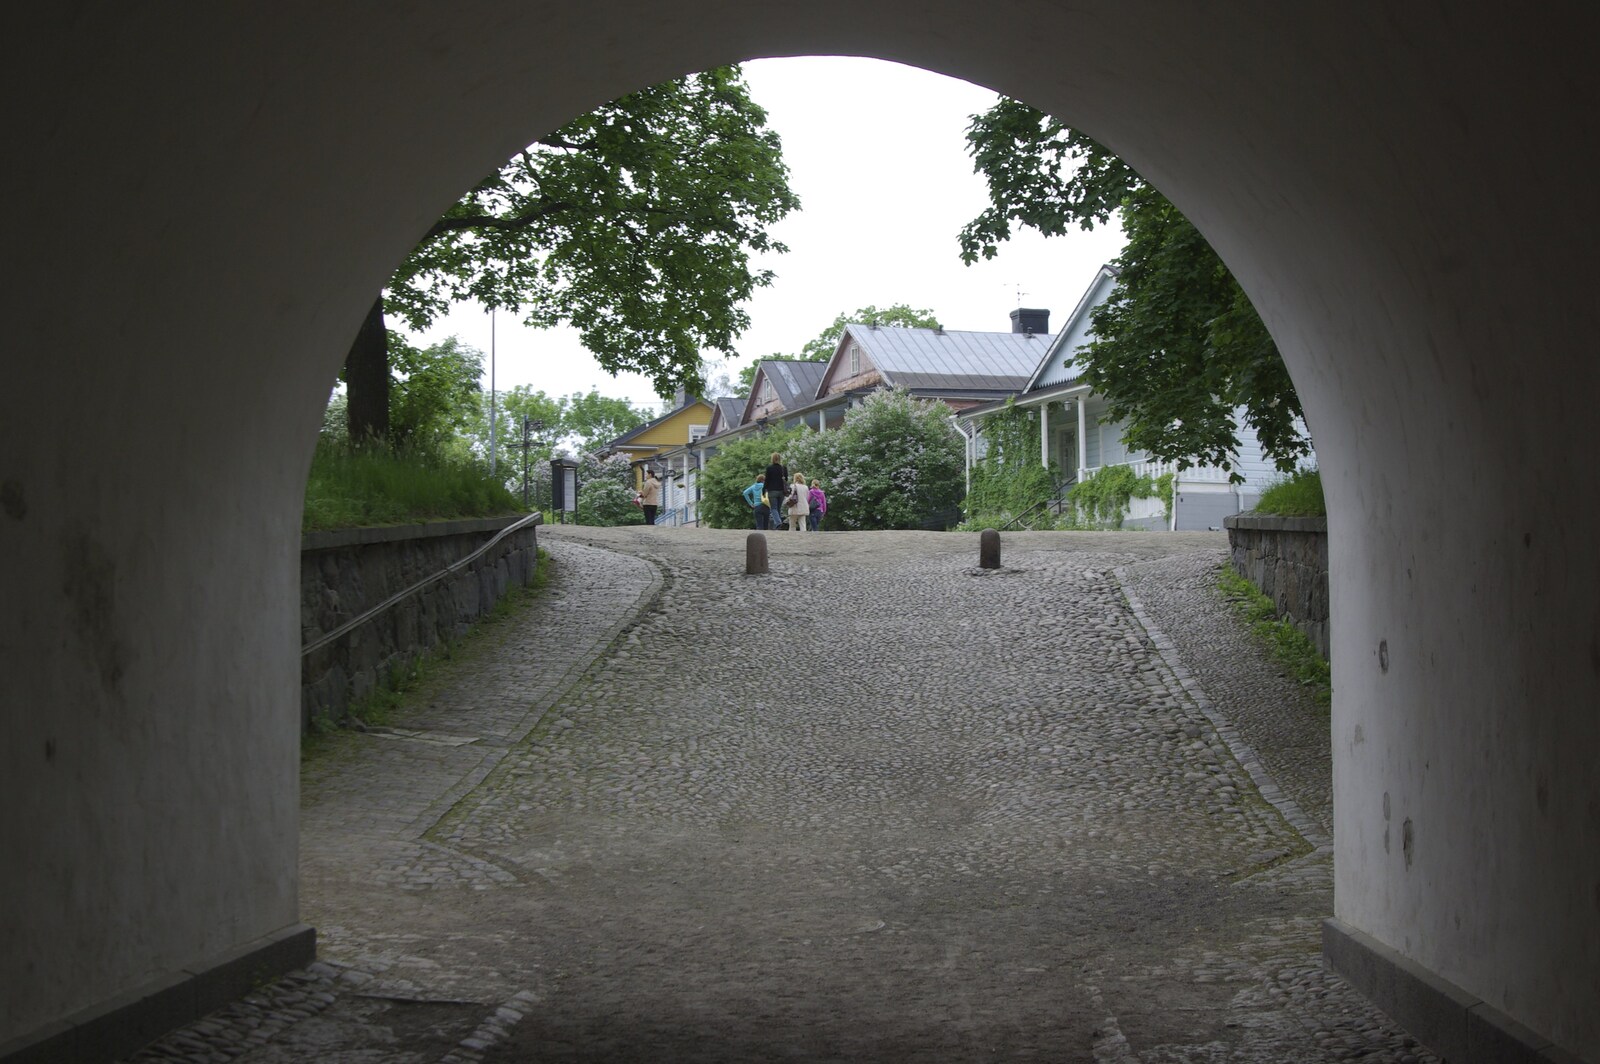 Genesis in Concert, and Suomenlinna, Helsinki, Finland - 11th June 2007: A view through a tunnel